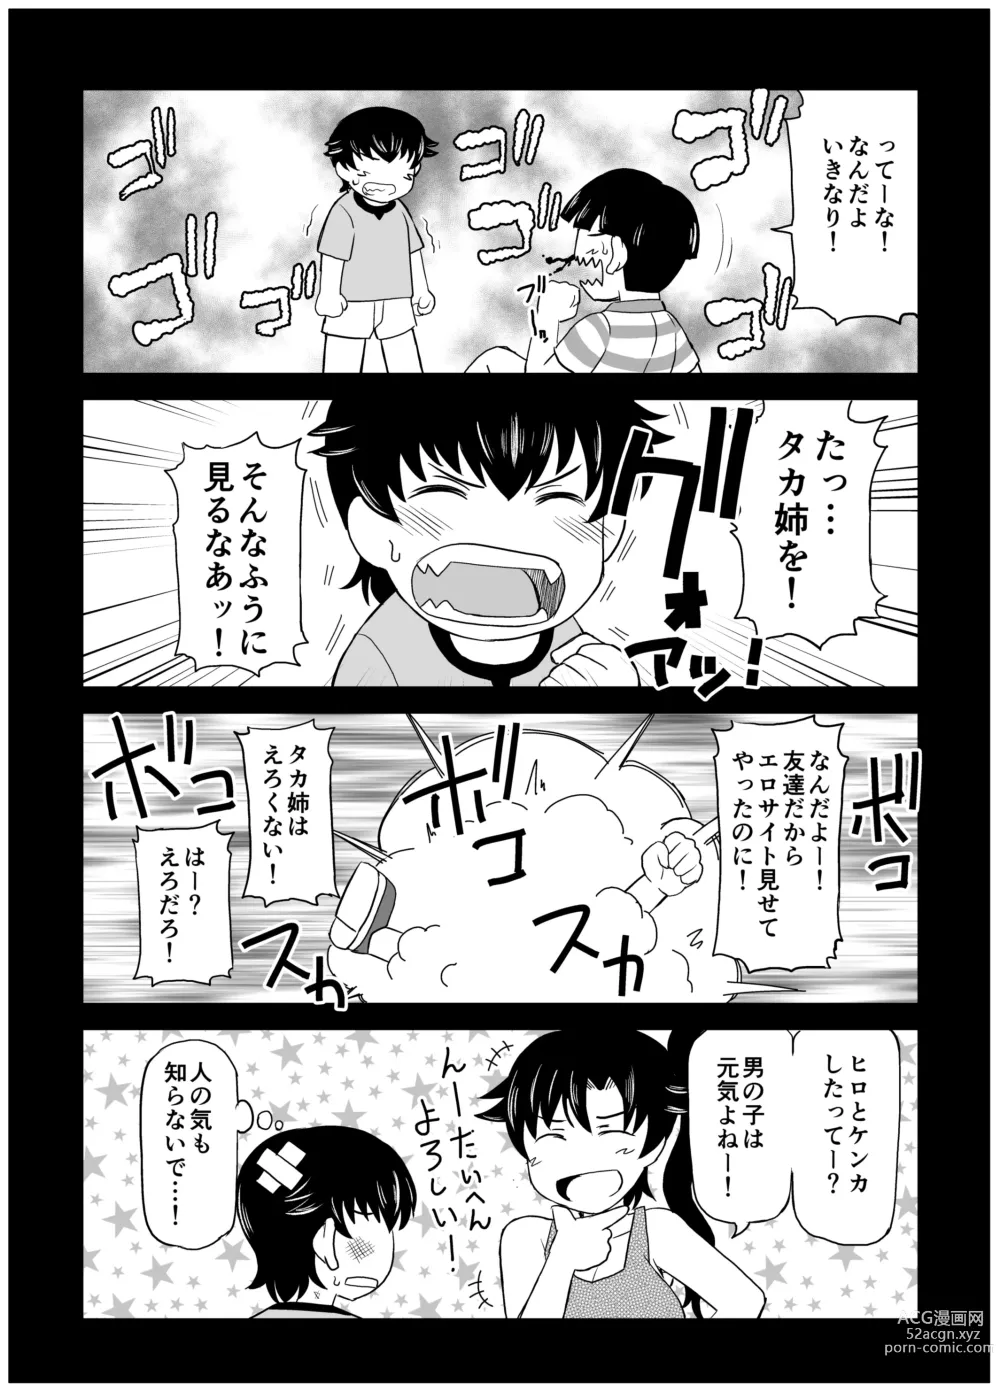 Page 8 of doujinshi Sister TR Anetorare-My favorite sister was stolen by him-DL increased version